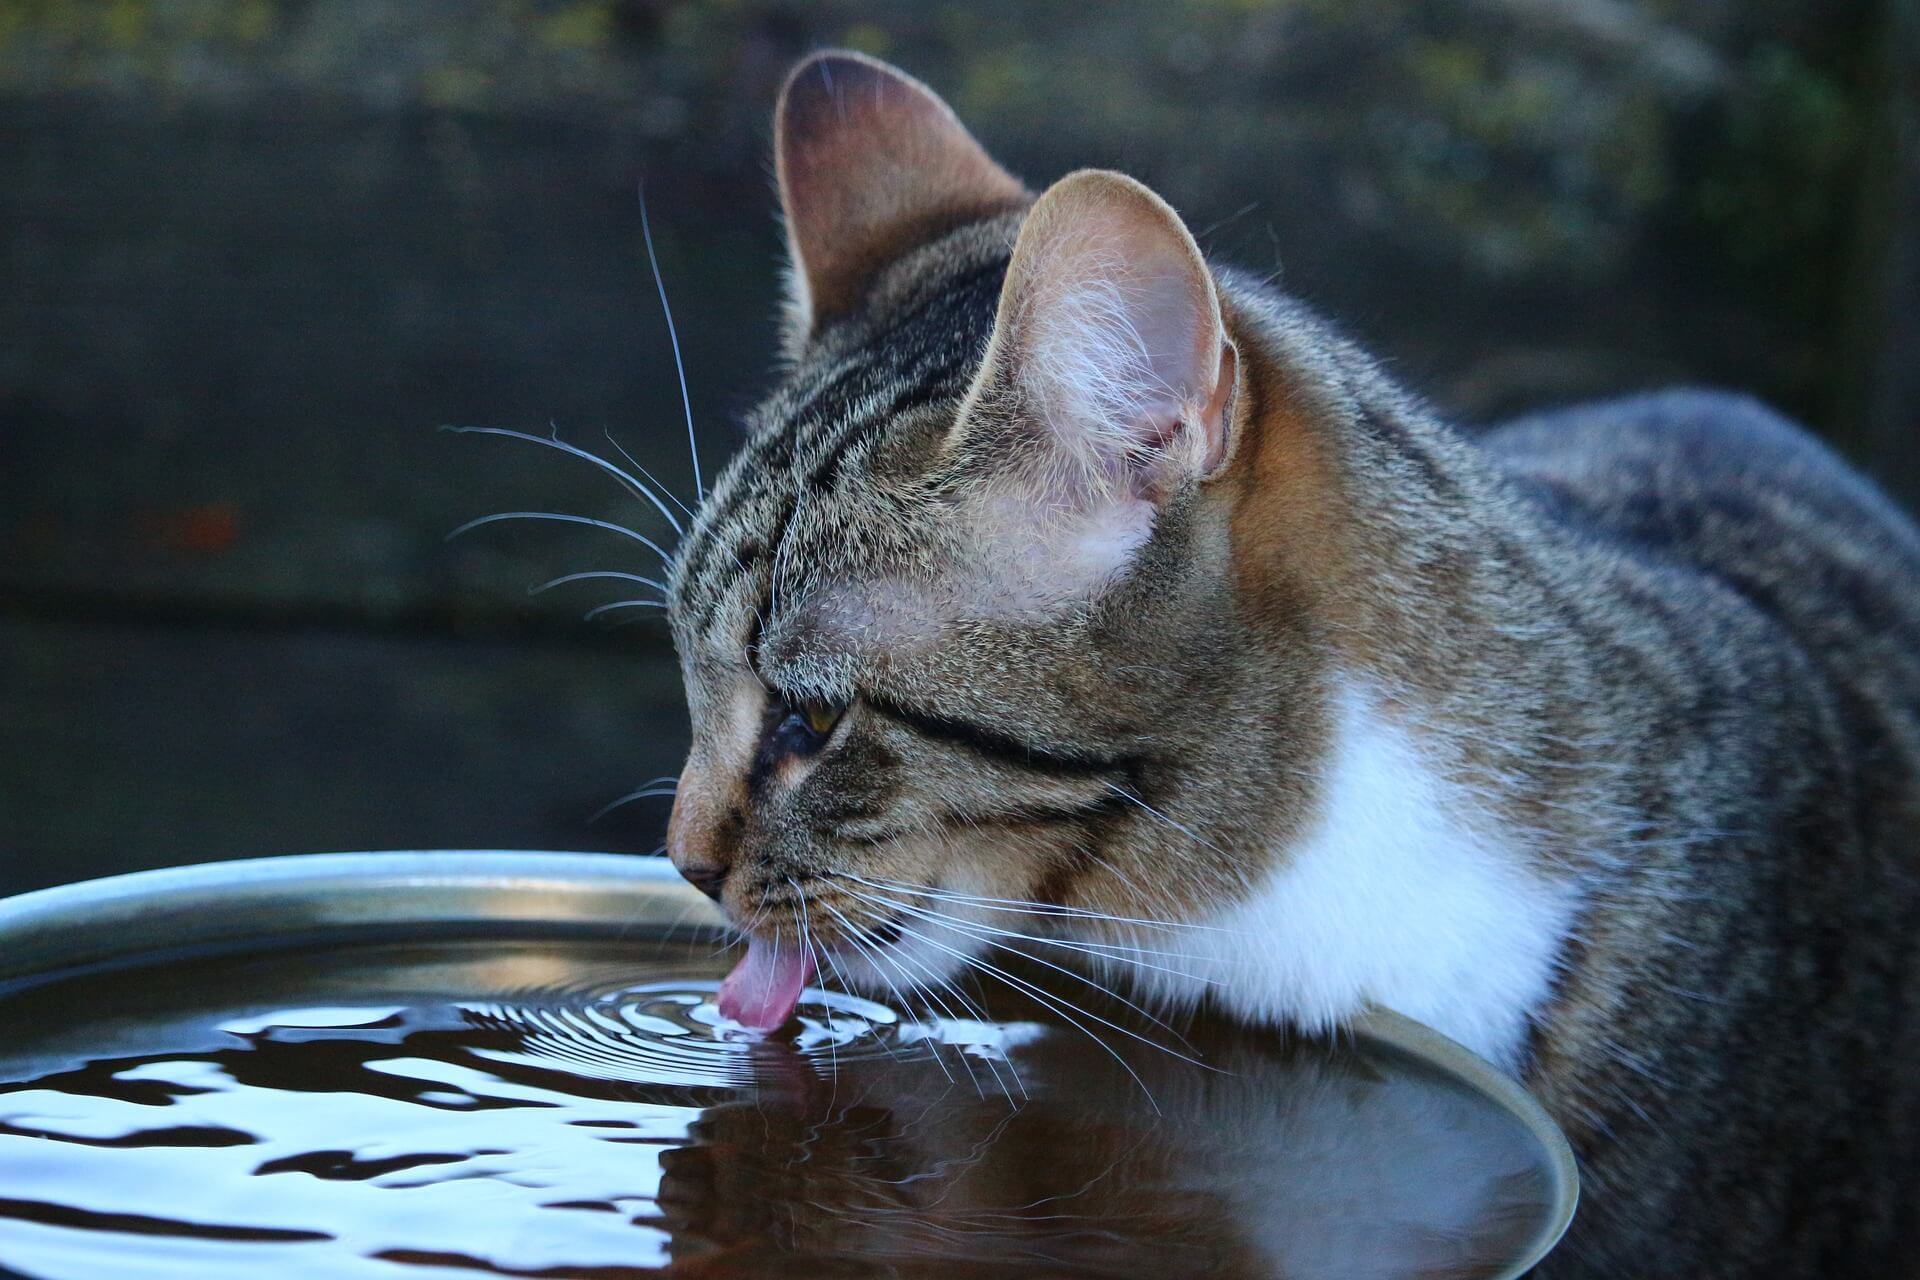 A cat drinking.